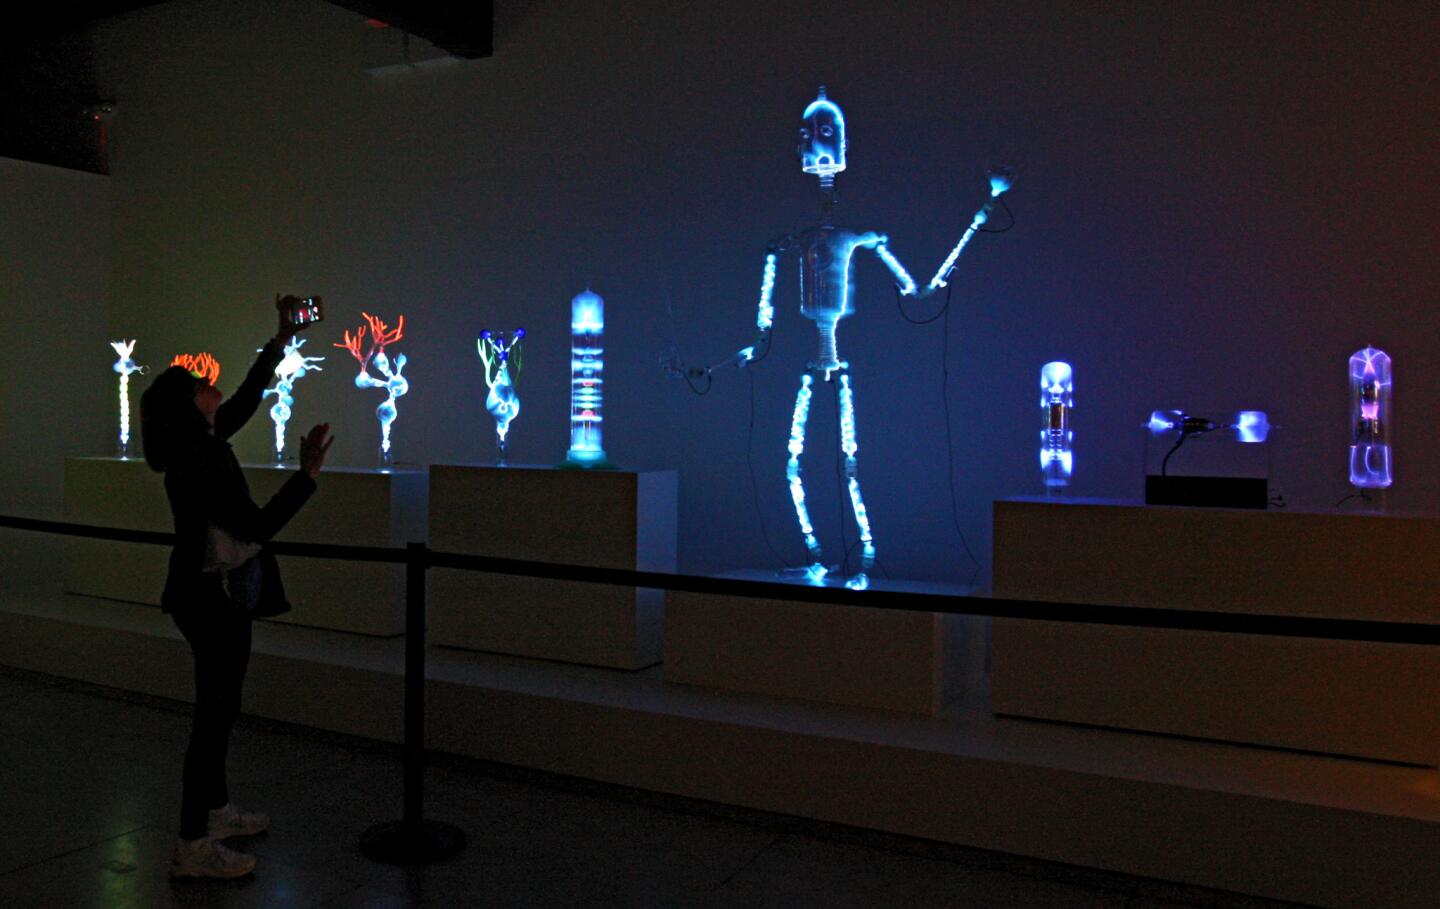 A woman takes a photo of Wayne Strattman's displays from the new exhibit called the Art of Plasma, at the Museum of Neon Art (MONA) in Glendale on Friday, Feb. 24, 2017.